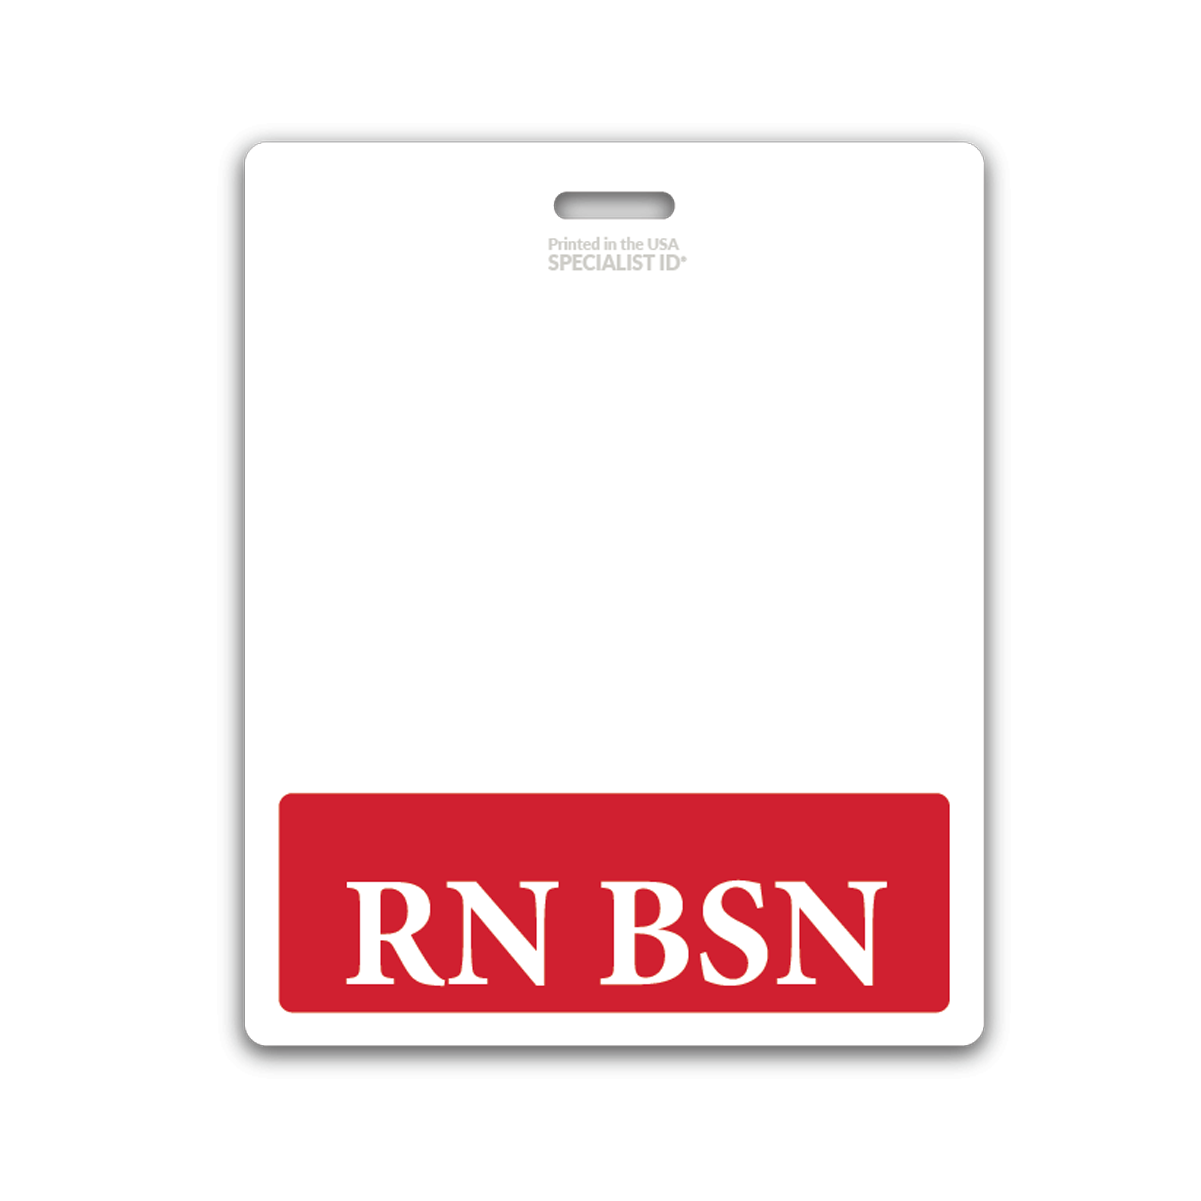 Extra Large and Long RN BSN Badge Buddy with Red Border - Double Side Print